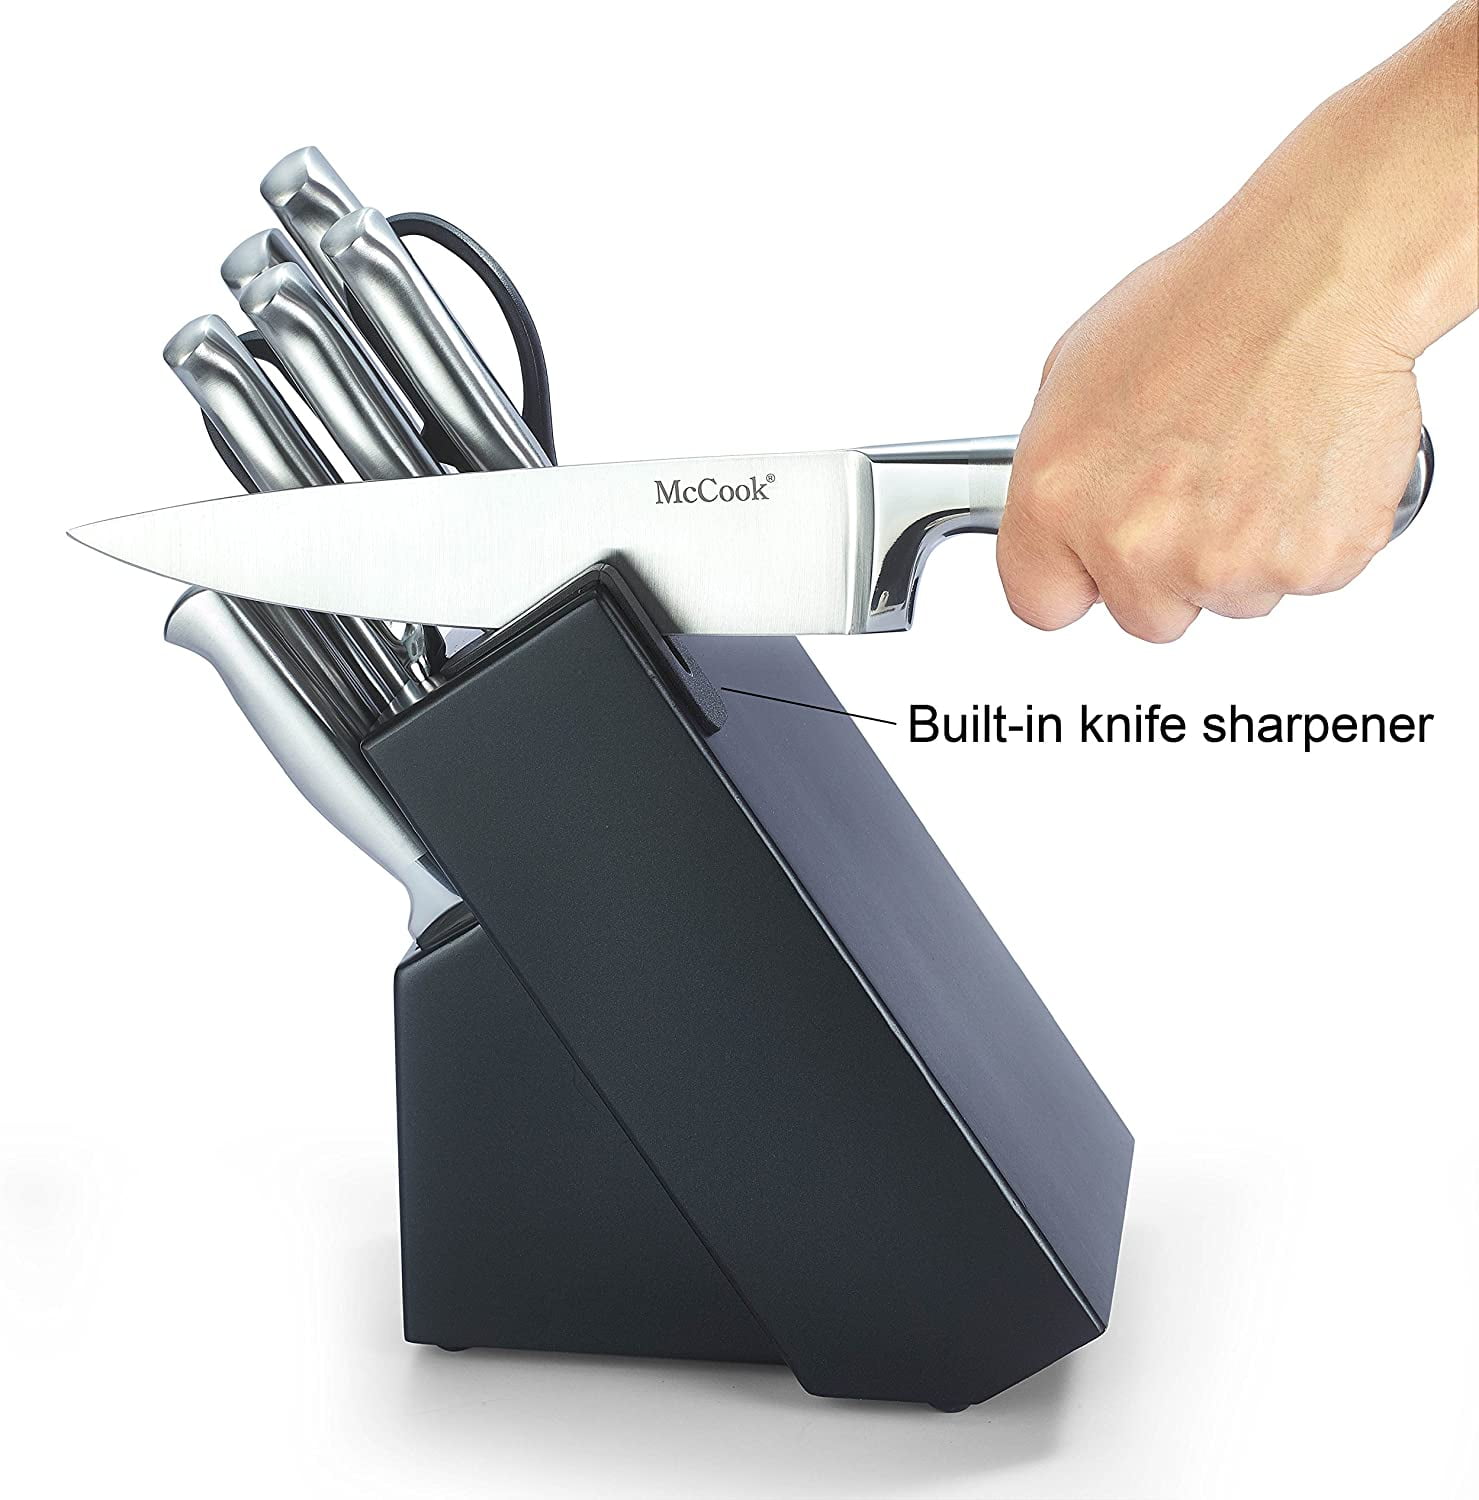 This15-piece knife set with a block and built-in sharpener is now reduced  by 20% to just $40